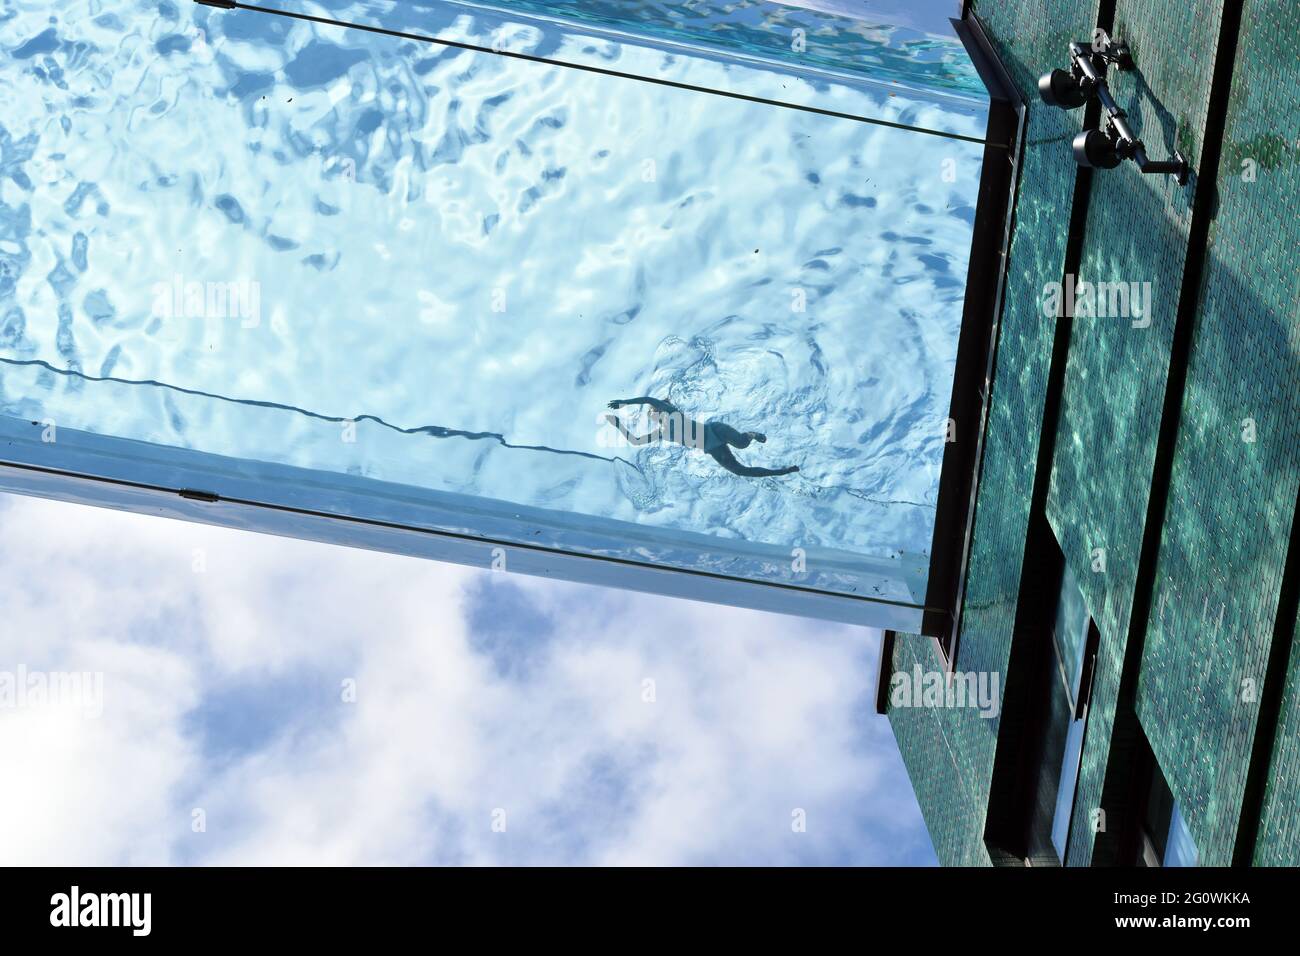 London, UK. 3rd June, 2021. Embassy Gardens sky pool at Vauxhall on sunny day. Credit: JOHNNY ARMSTEAD/Alamy Live News Stock Photo